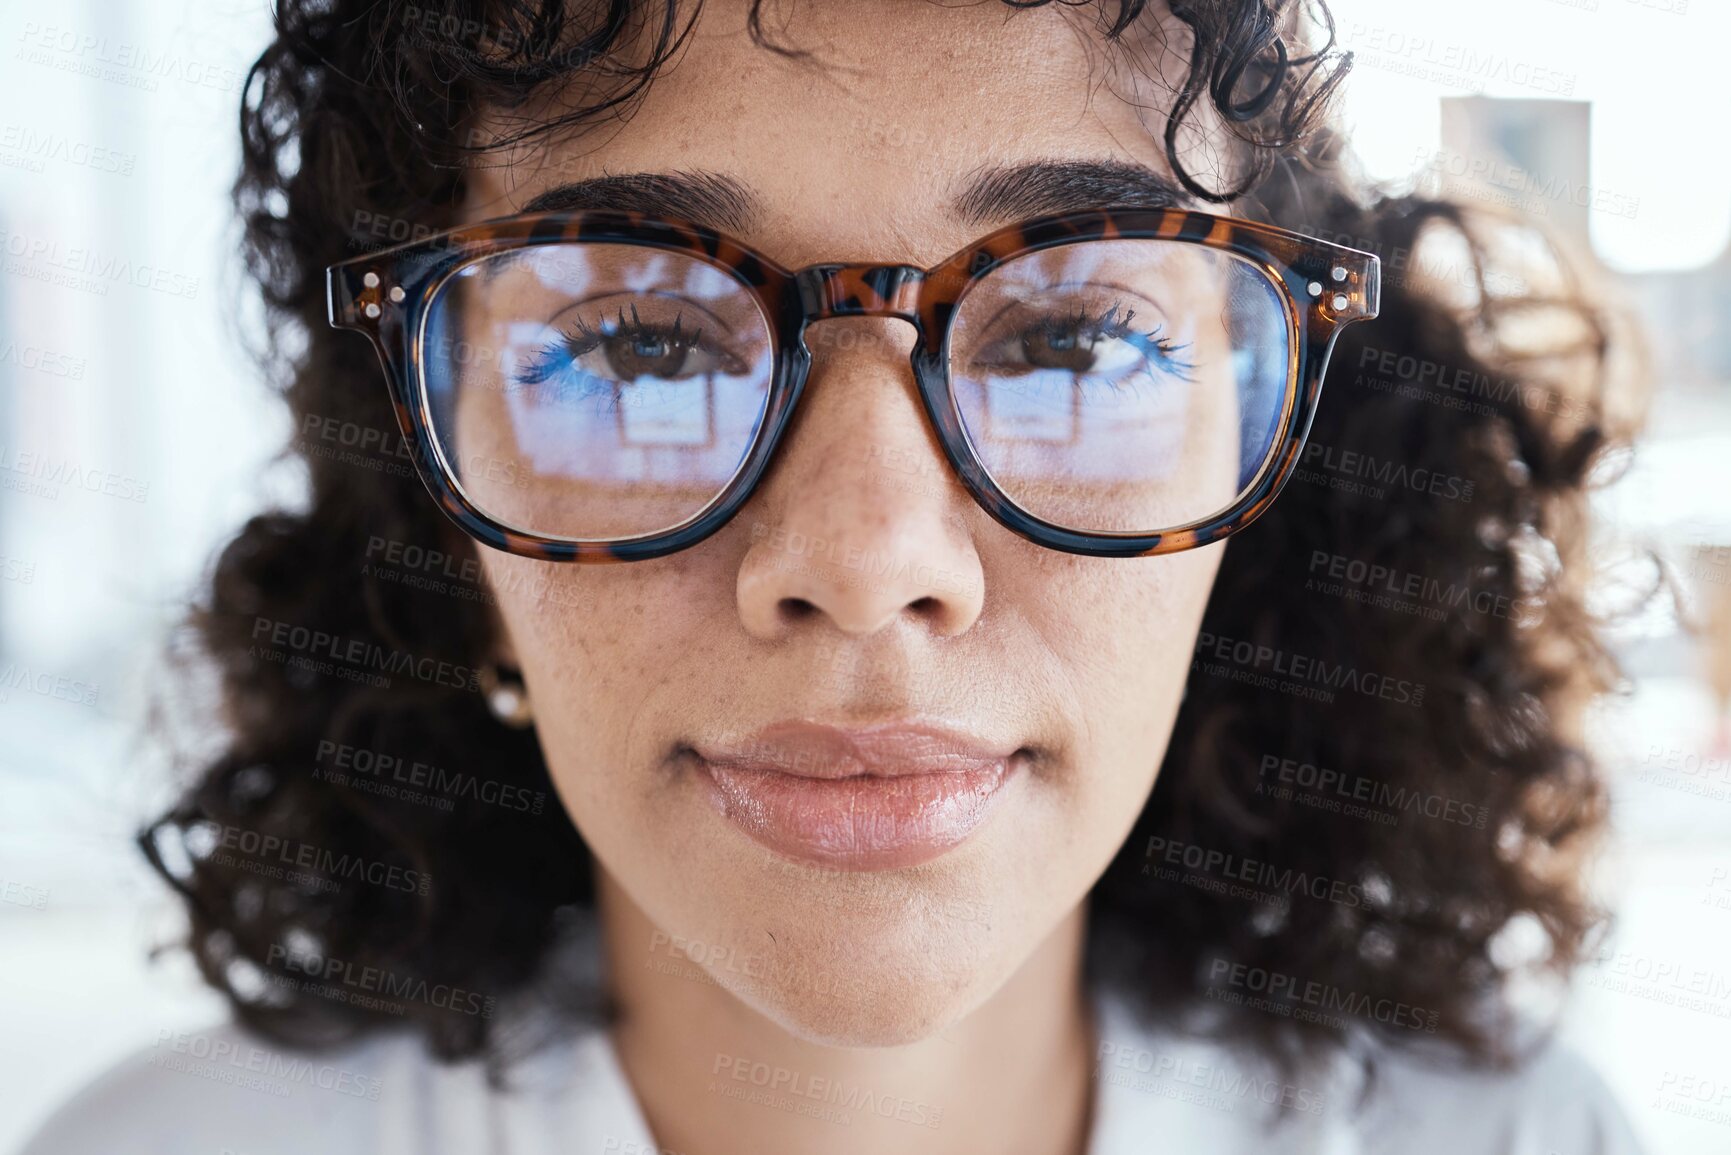 Buy stock photo Portrait, therapist and face of woman with glasses, spectacles or eyewear feeling calm and focused. Head, vision and closeup of employee or worker looking serious with eyesight in an office